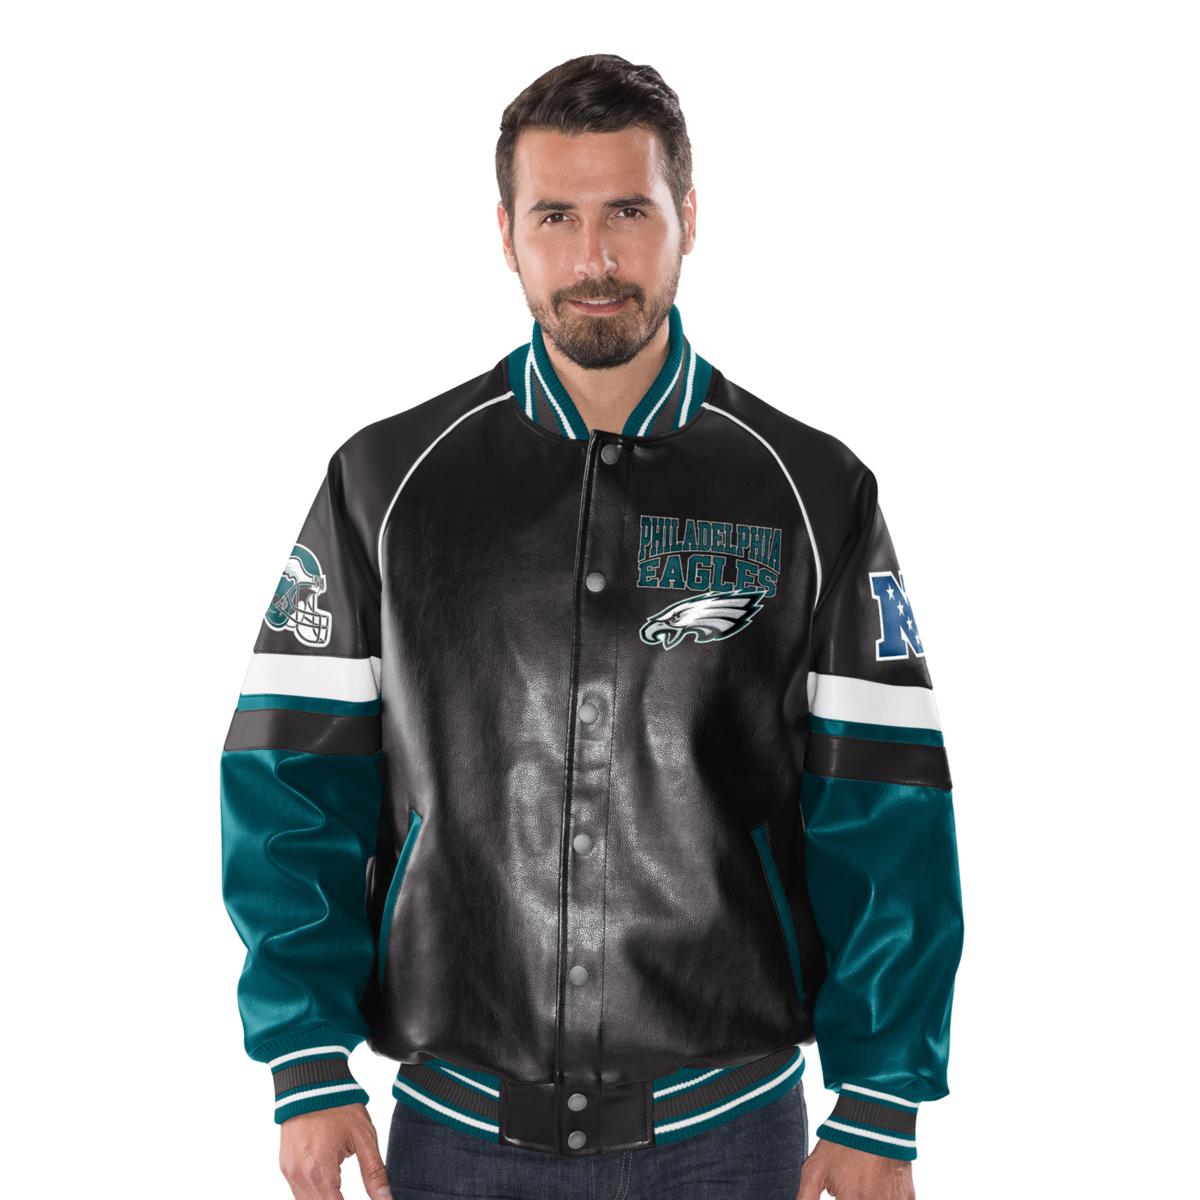 Officially Licensed NFL Men's Faux Suede Varsity Jacket by Glll